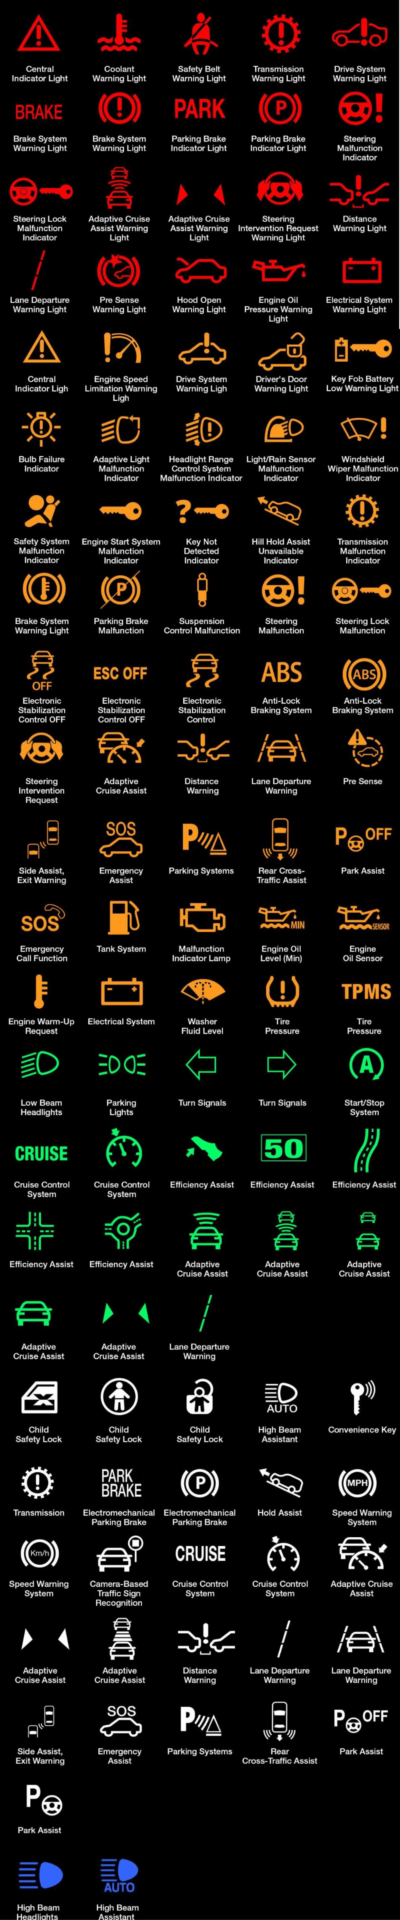 Honda Odyssey dashboard symbols and meanings